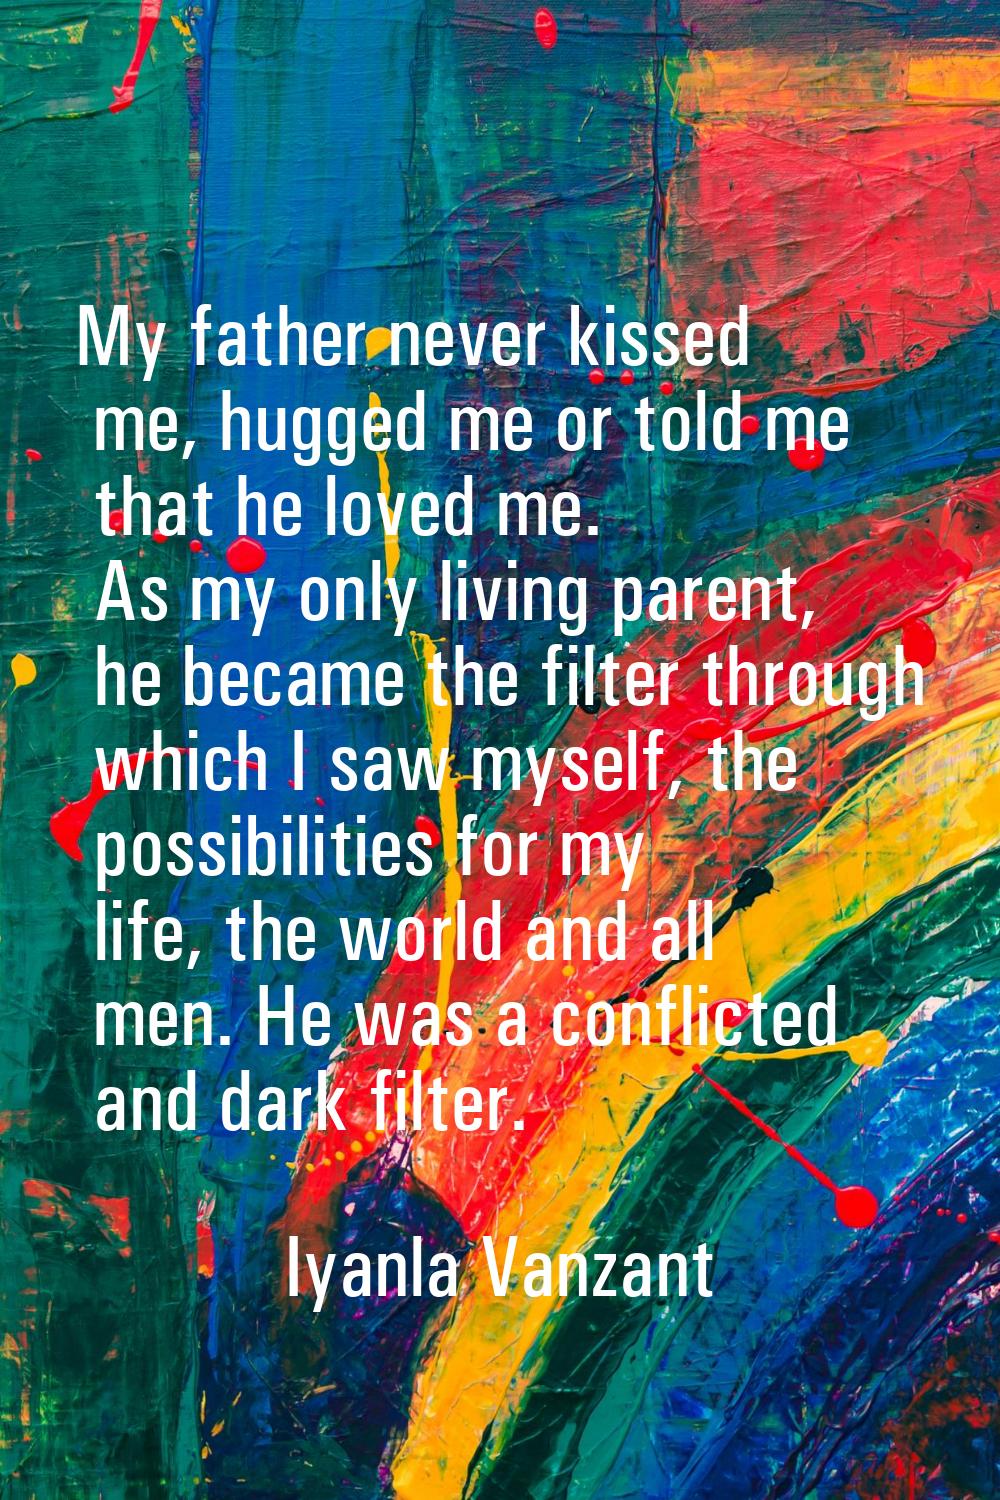 My father never kissed me, hugged me or told me that he loved me. As my only living parent, he beca